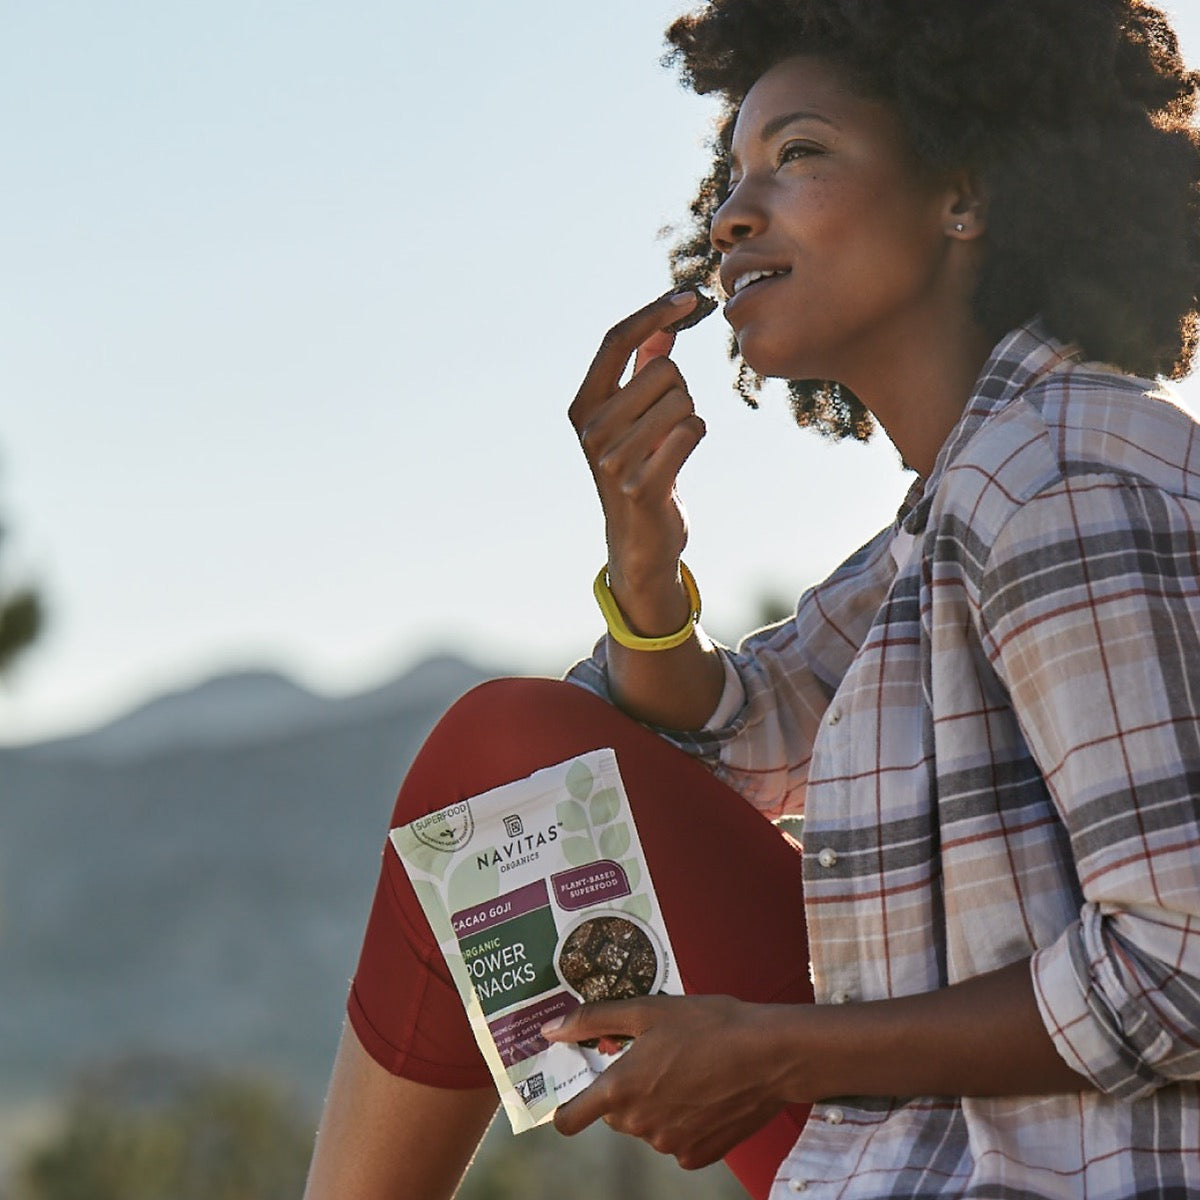 Woman enjoying Navitas Power Snacks Cacao Goji outside with mountains in the background.